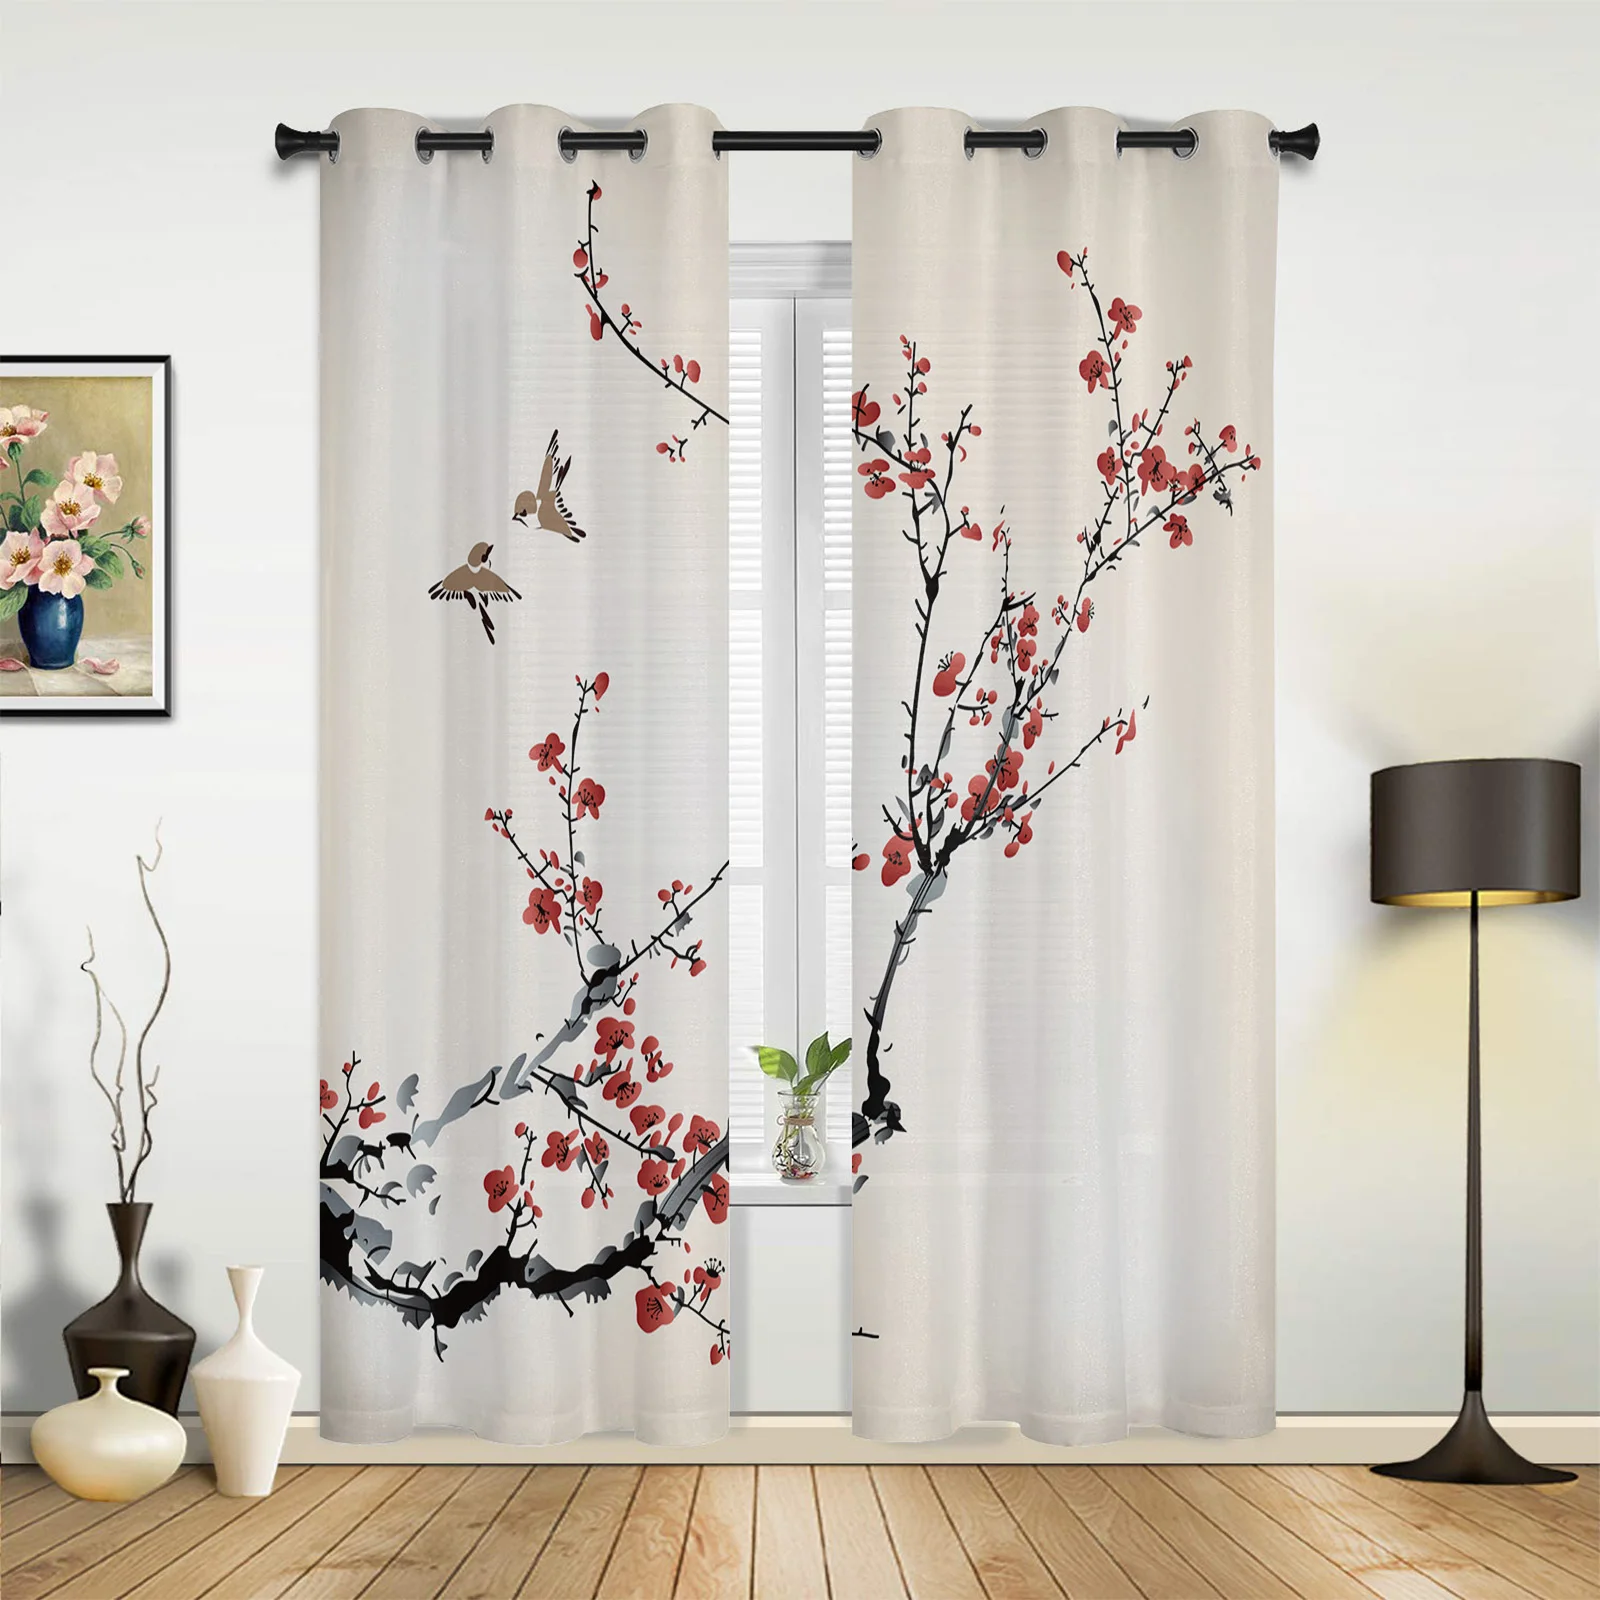 

Plum Blossom Branches Ink Style Curtains for Bedroom Living Room Drapes Kitchen Children's Room Window Curtain Modern Home Decor